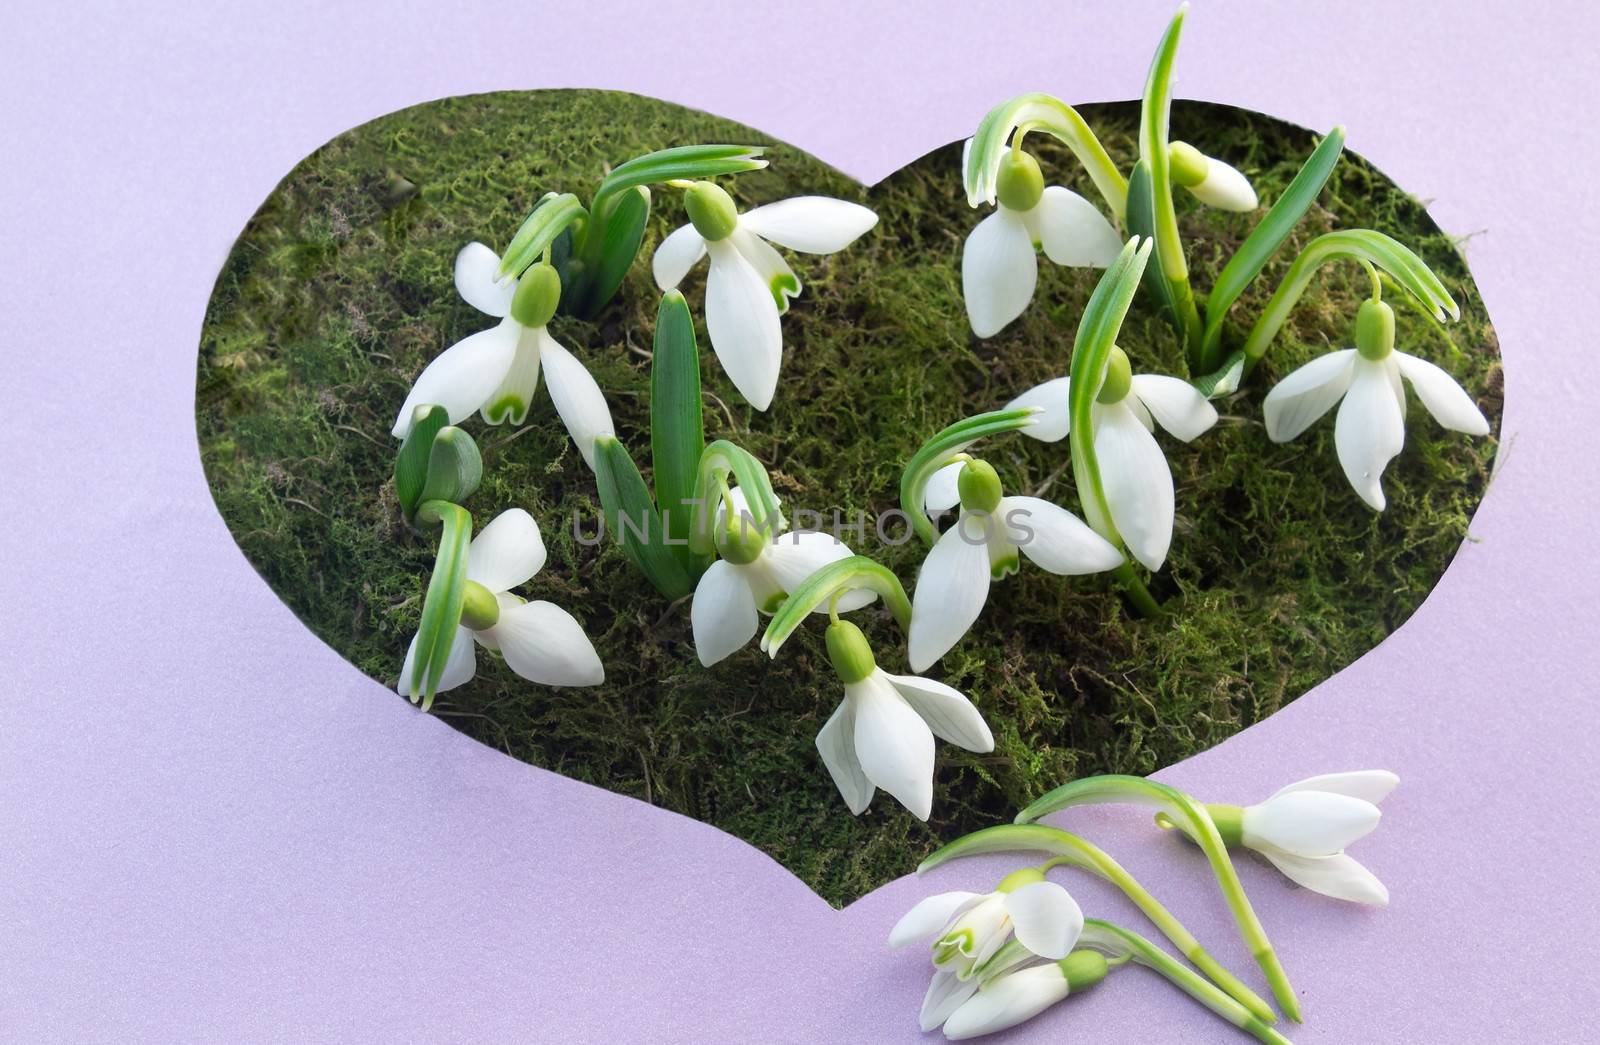 The first flowers - snowdrops on the background of green moss by georgina198